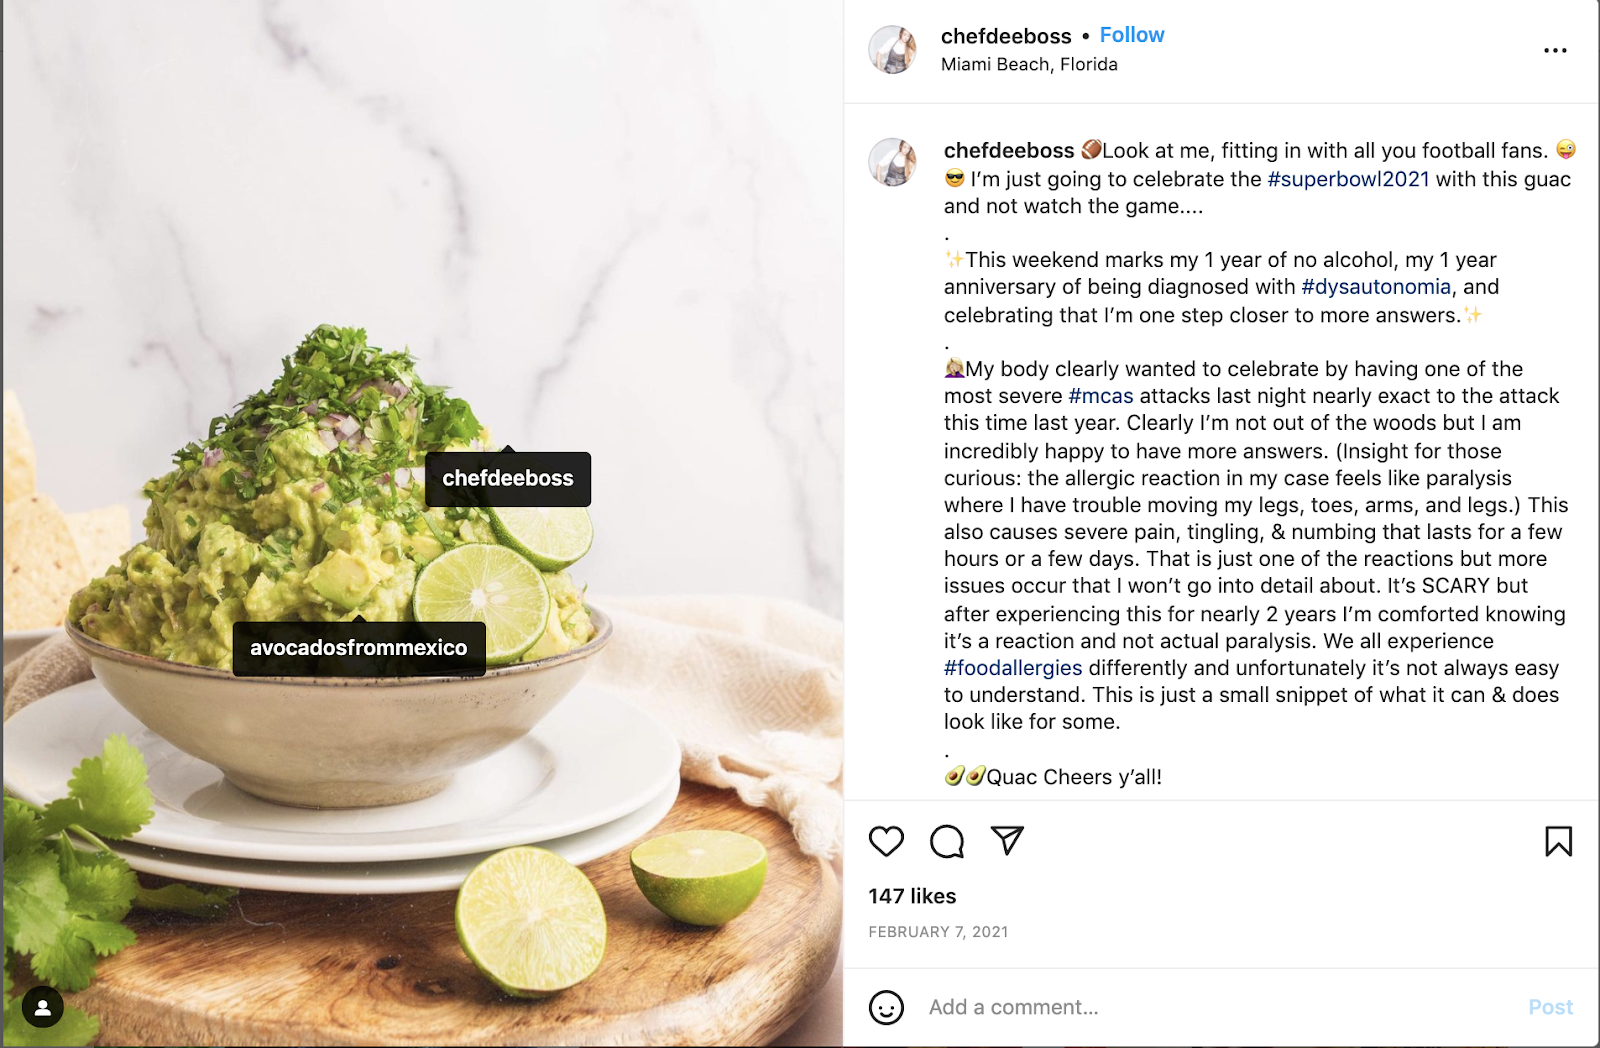 Screenshot of Instagram post featuring a towering bowl of guac with limes